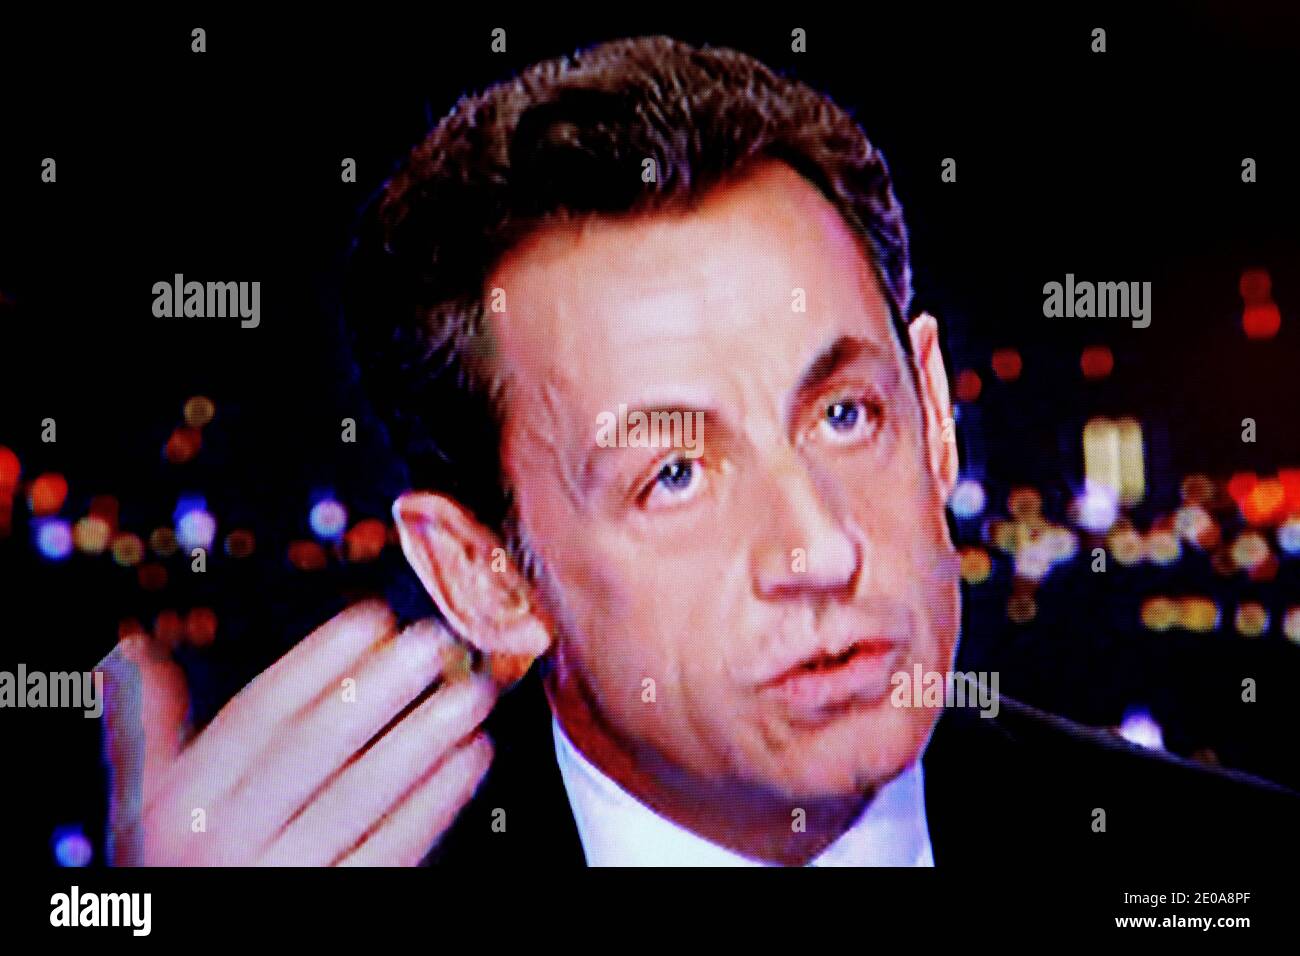 French President Nicolas Sarkozy, seen in this video grab, appears on French TF1 channel prime time news programme as he formally declares his candidacy for a second term interviewed by anchor Laurence Ferrari at their studios in Boulogne-Billancourt near Paris, France on February 15, 2012. Photo by Patrick Bernard/ABACAPRESS.COM Stock Photo